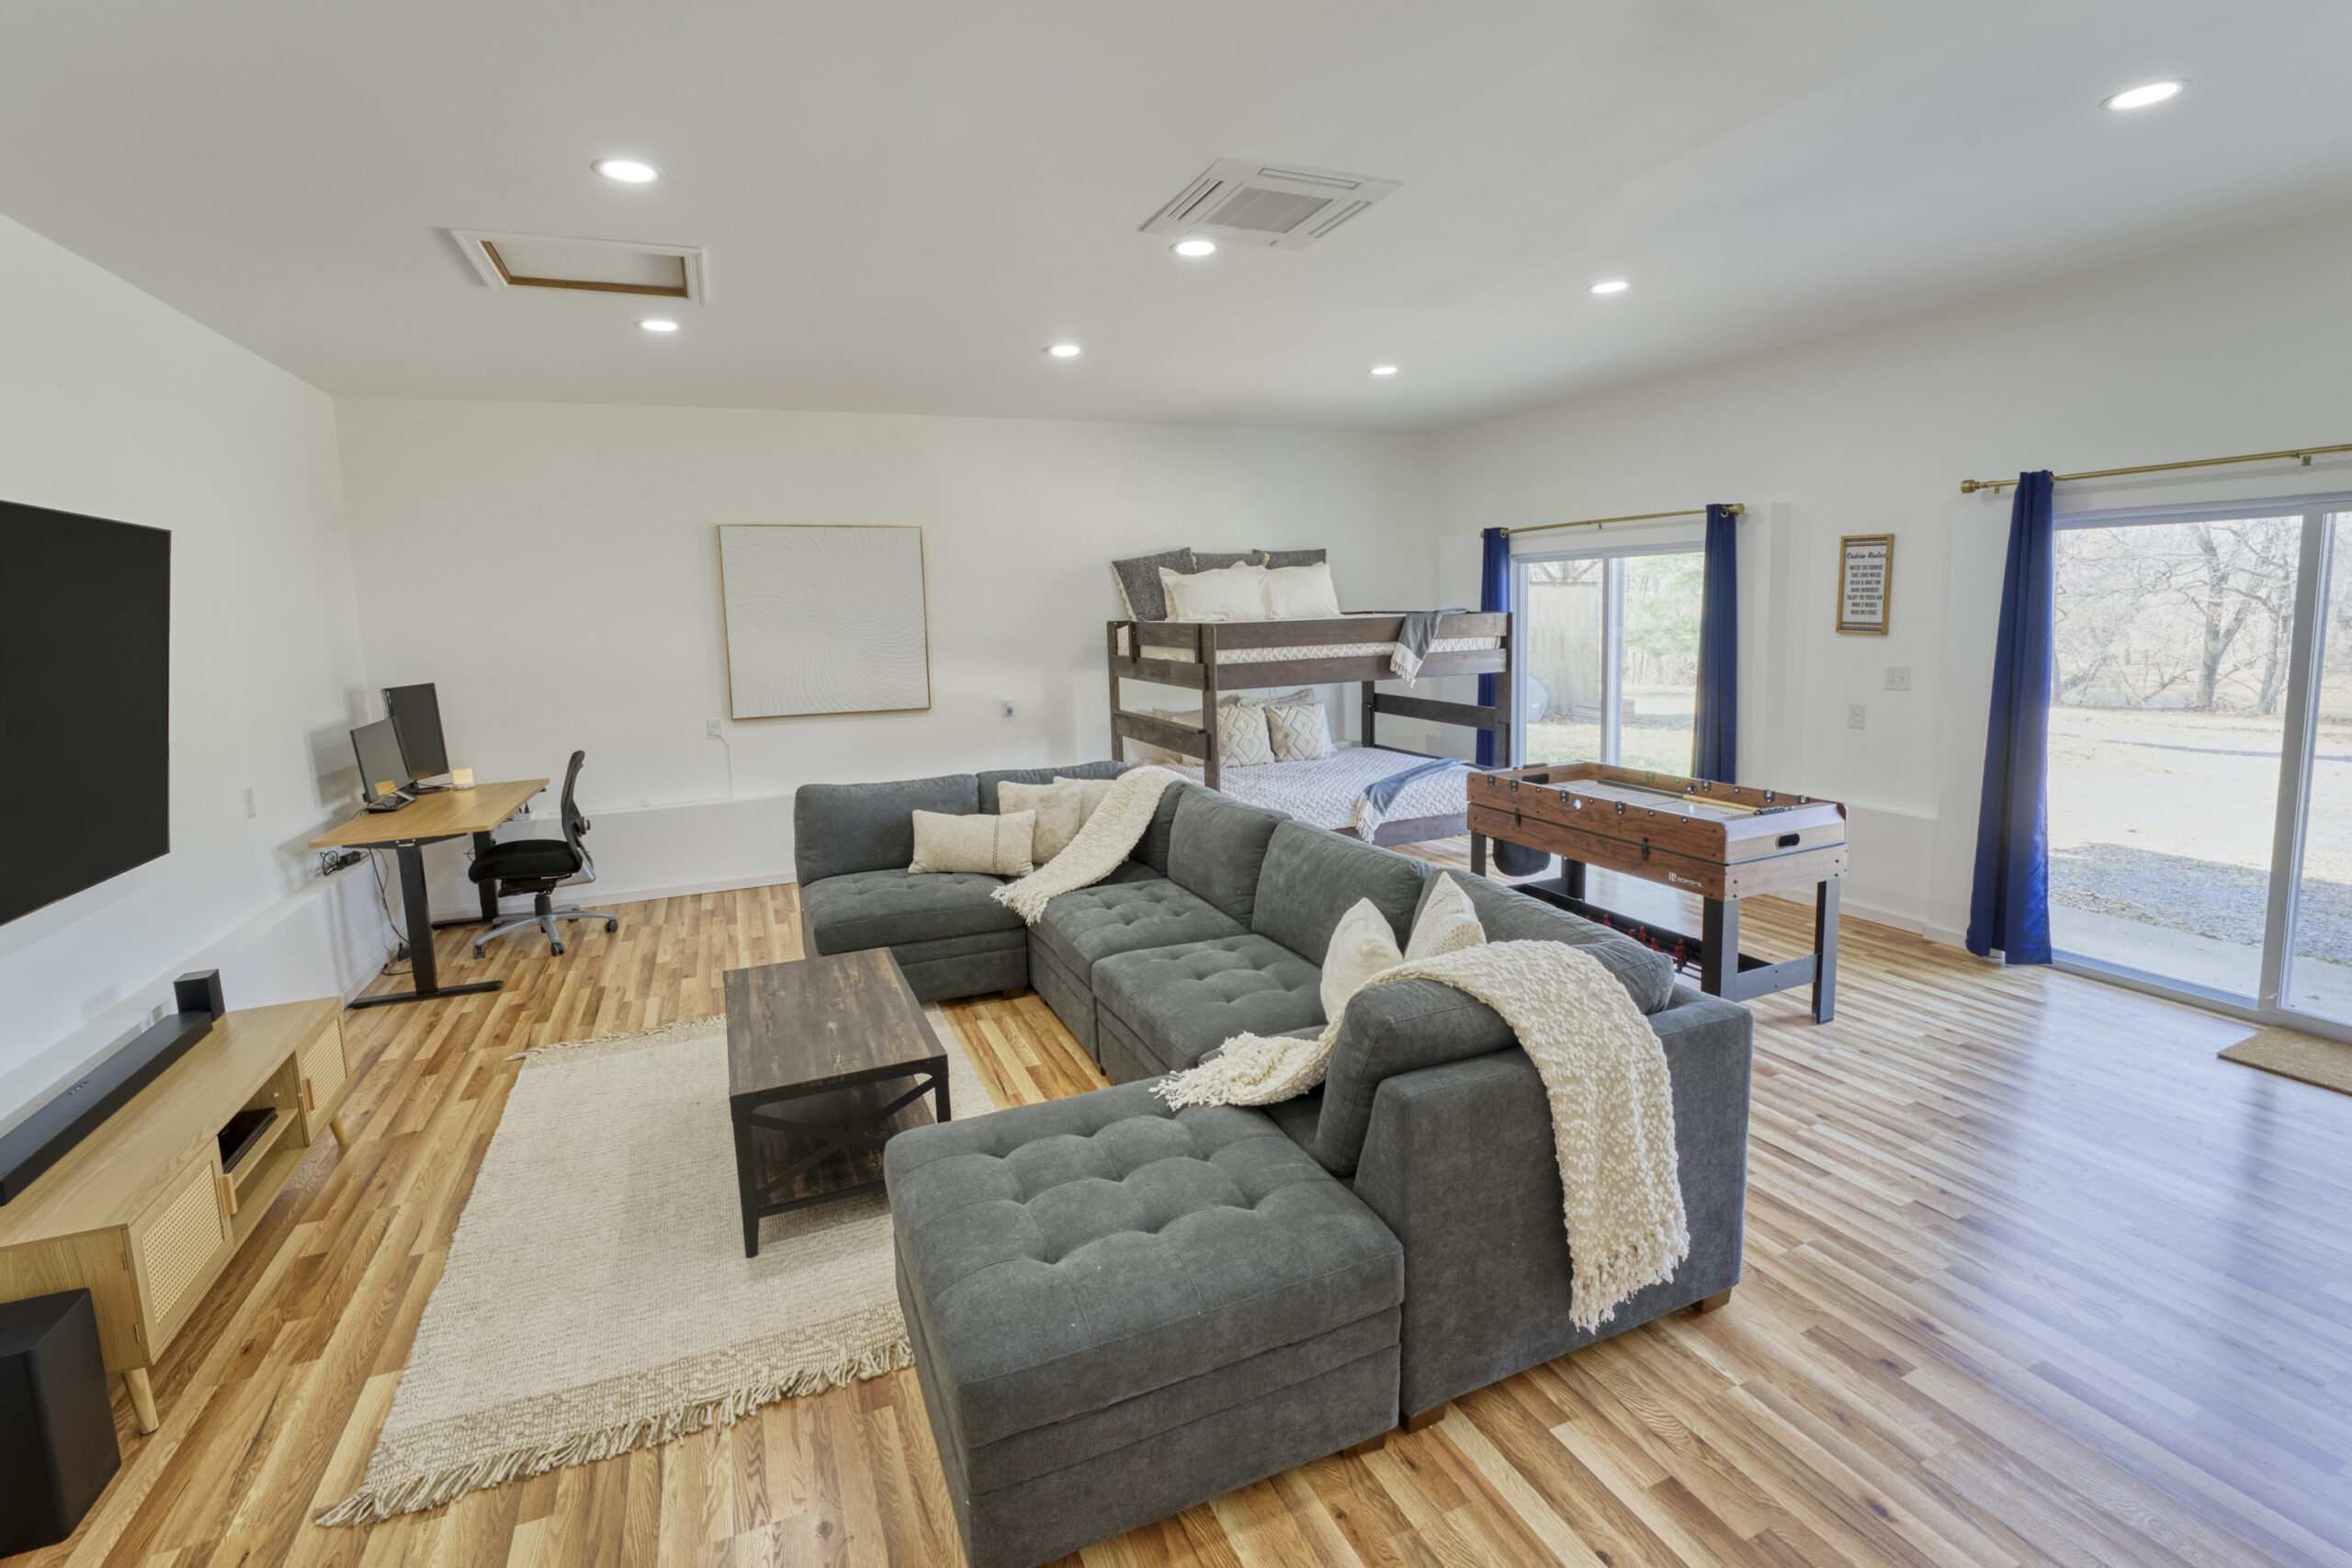 Professional interior photo of 4809 Grove Hill River Rd - showing the basement rec room with mounted big screen tv, sectional couch, bunk beds, foosball table, and 2 sliding doors to the outside of the home